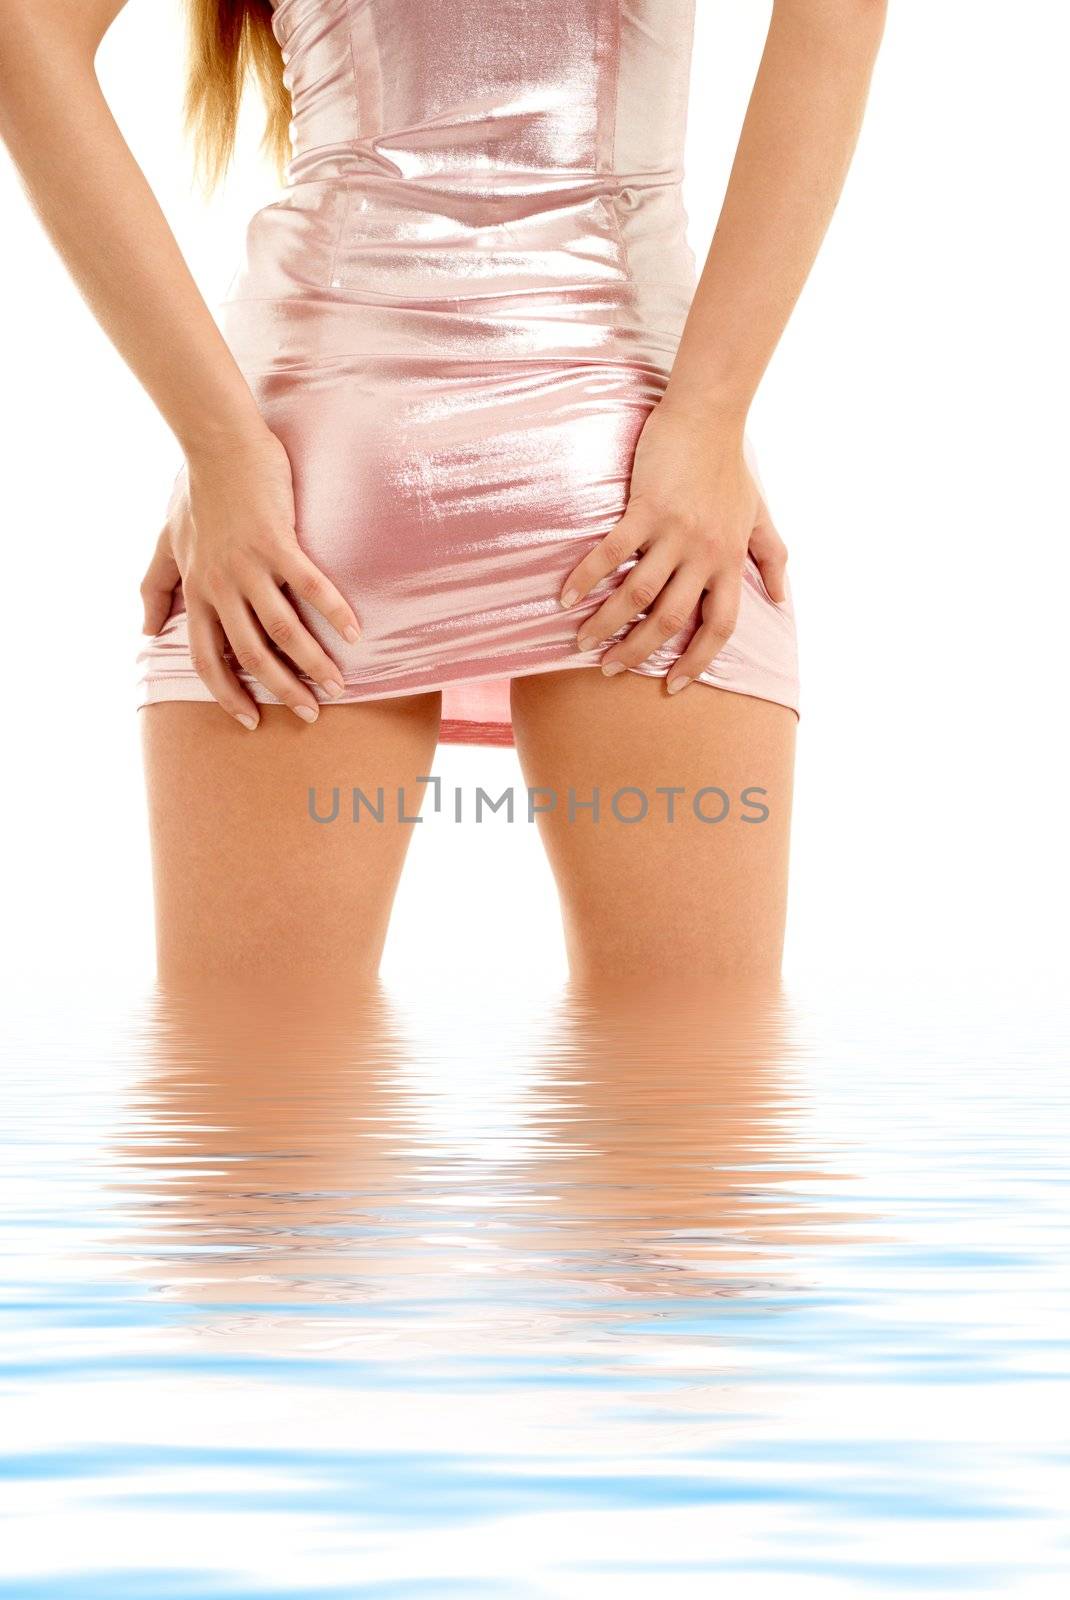 lady in pink shiny dress standing in water by dolgachov